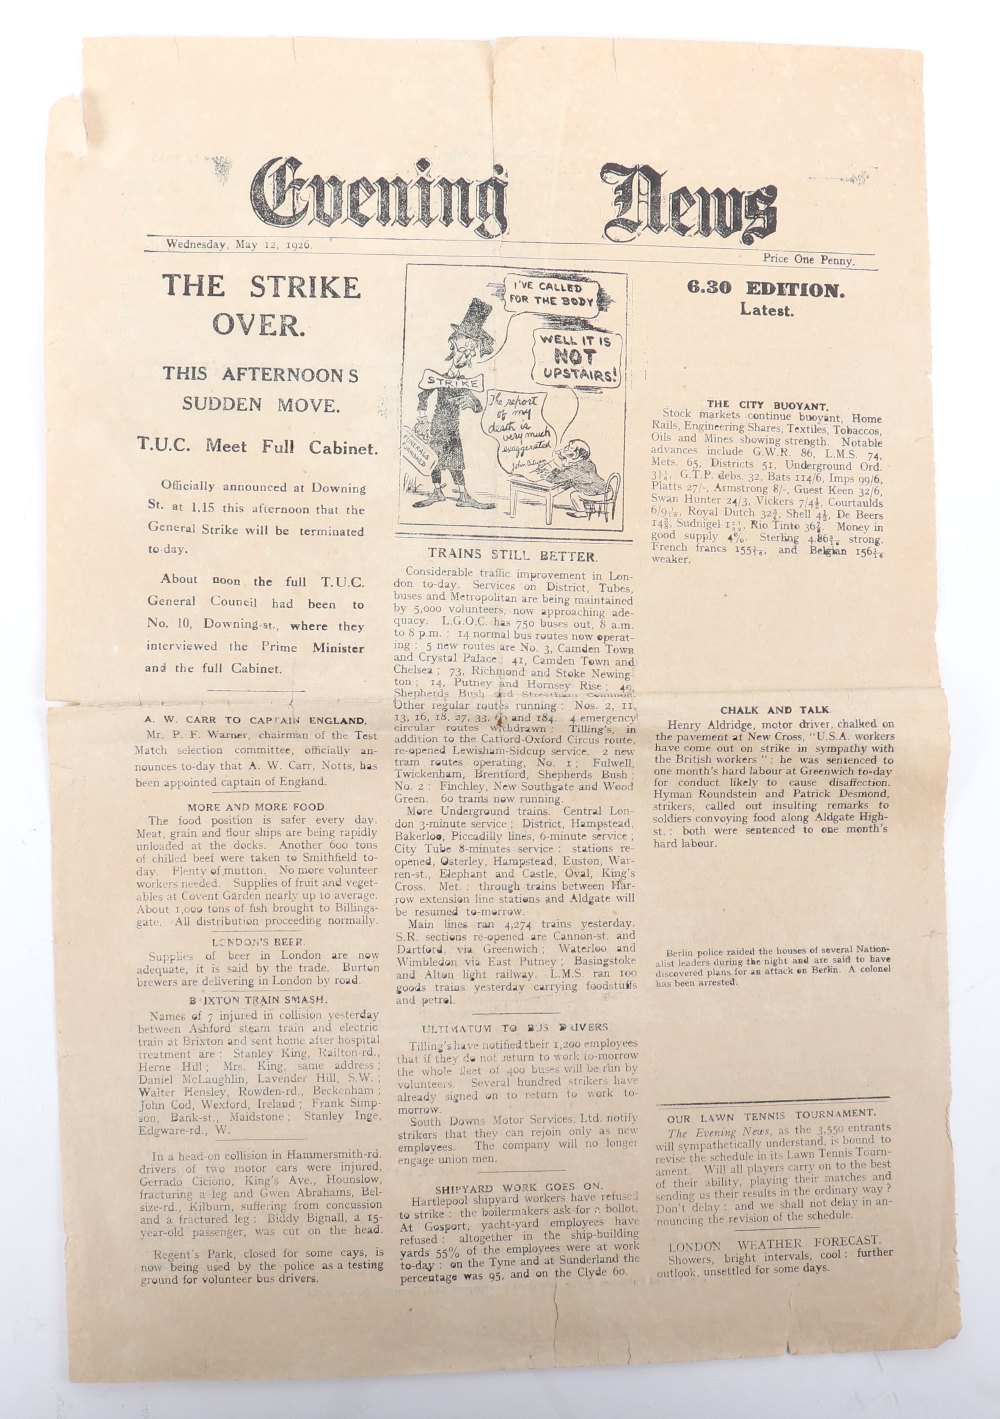 Evening News, "The Strike Over" Special edition Wednesday May 12 1926